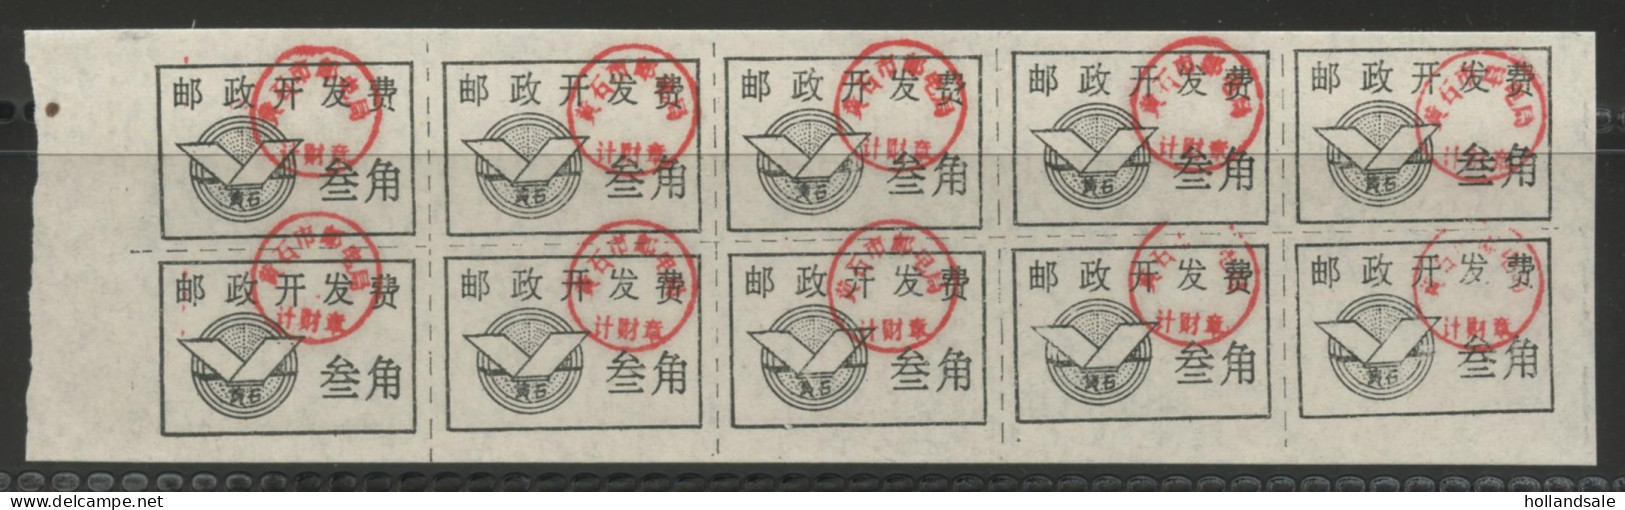 CHINA PRC / ADDED CHARGE - Labels Of Huangshi City, Hubei Prov. D&O 12-0167.  Block Of 10. - Impuestos